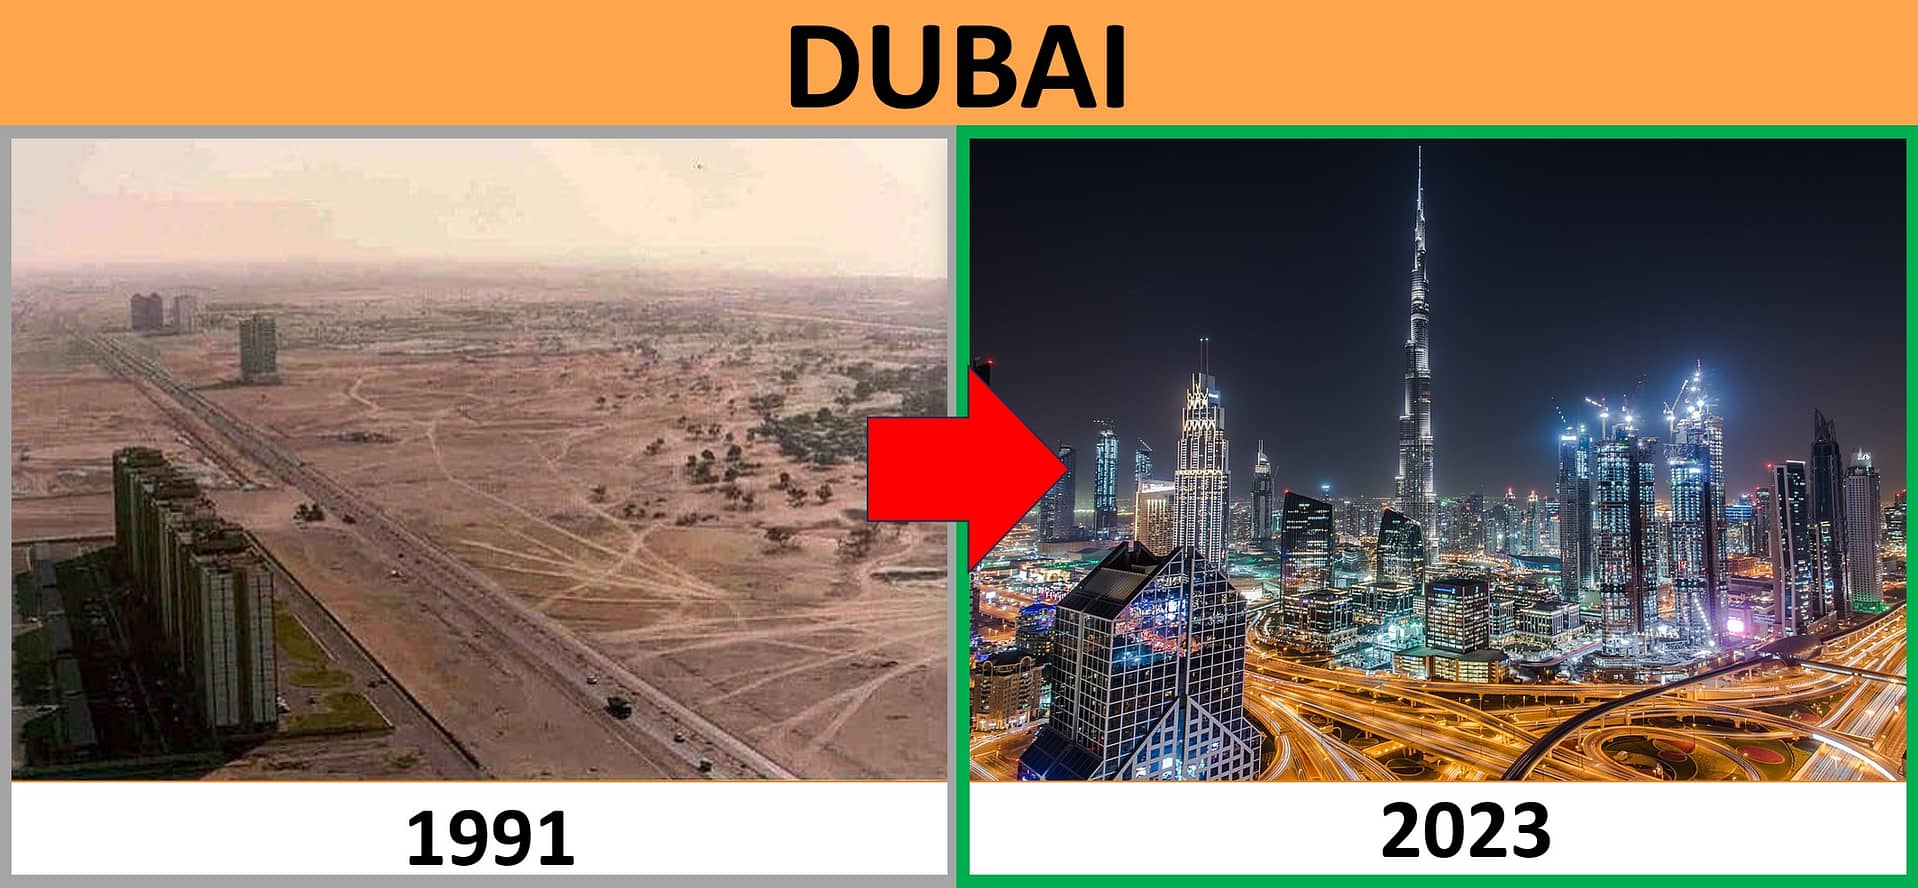 DUBAI in the past and now - the difference between 1991 and 2023